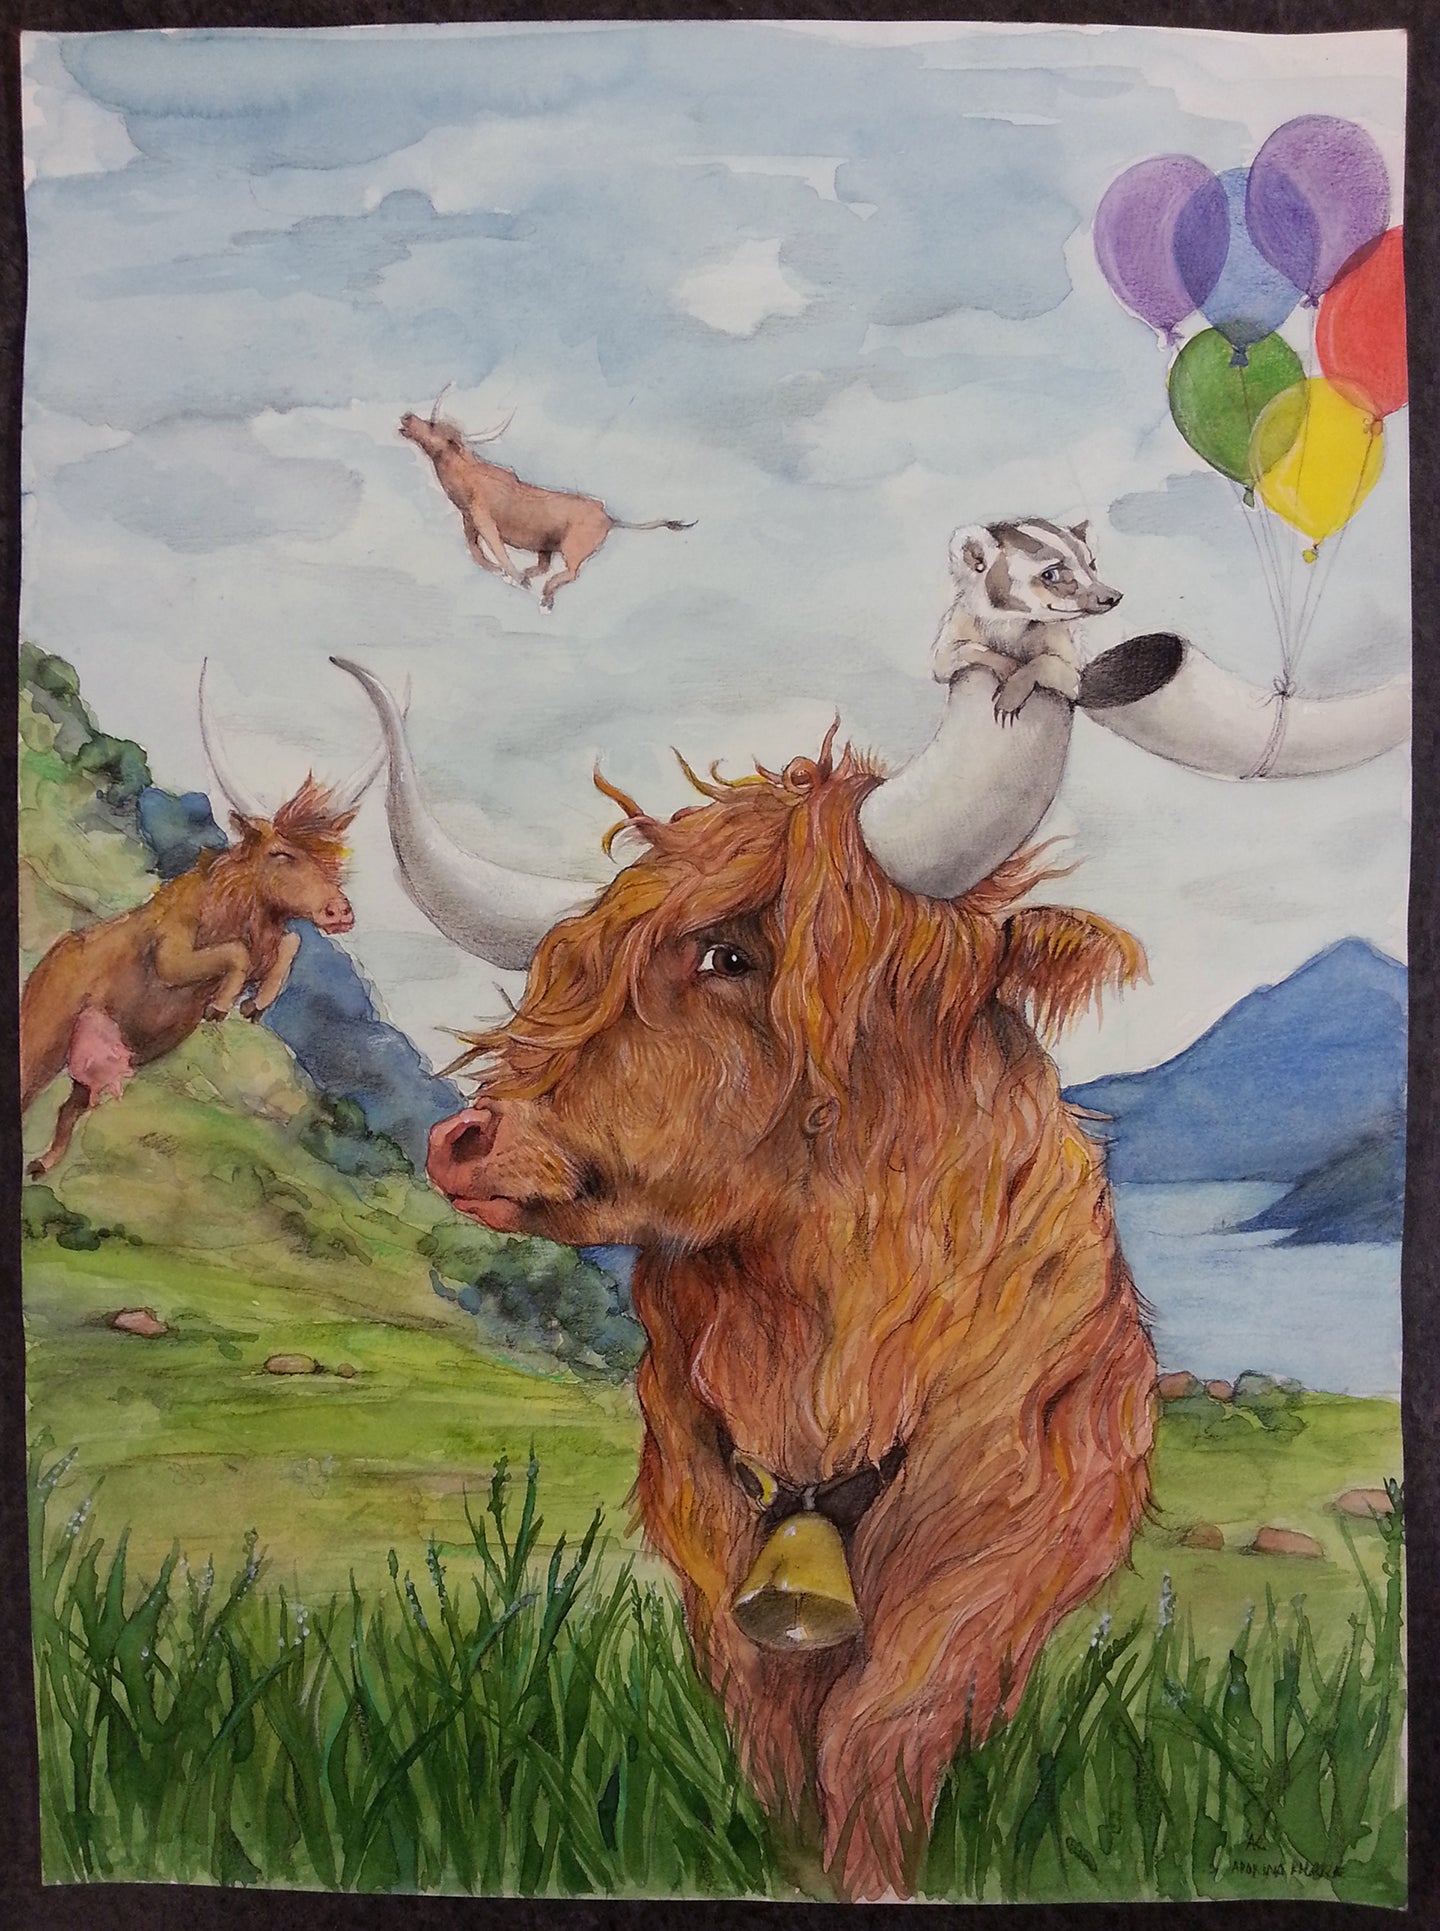 Highland Cattle with Balloons